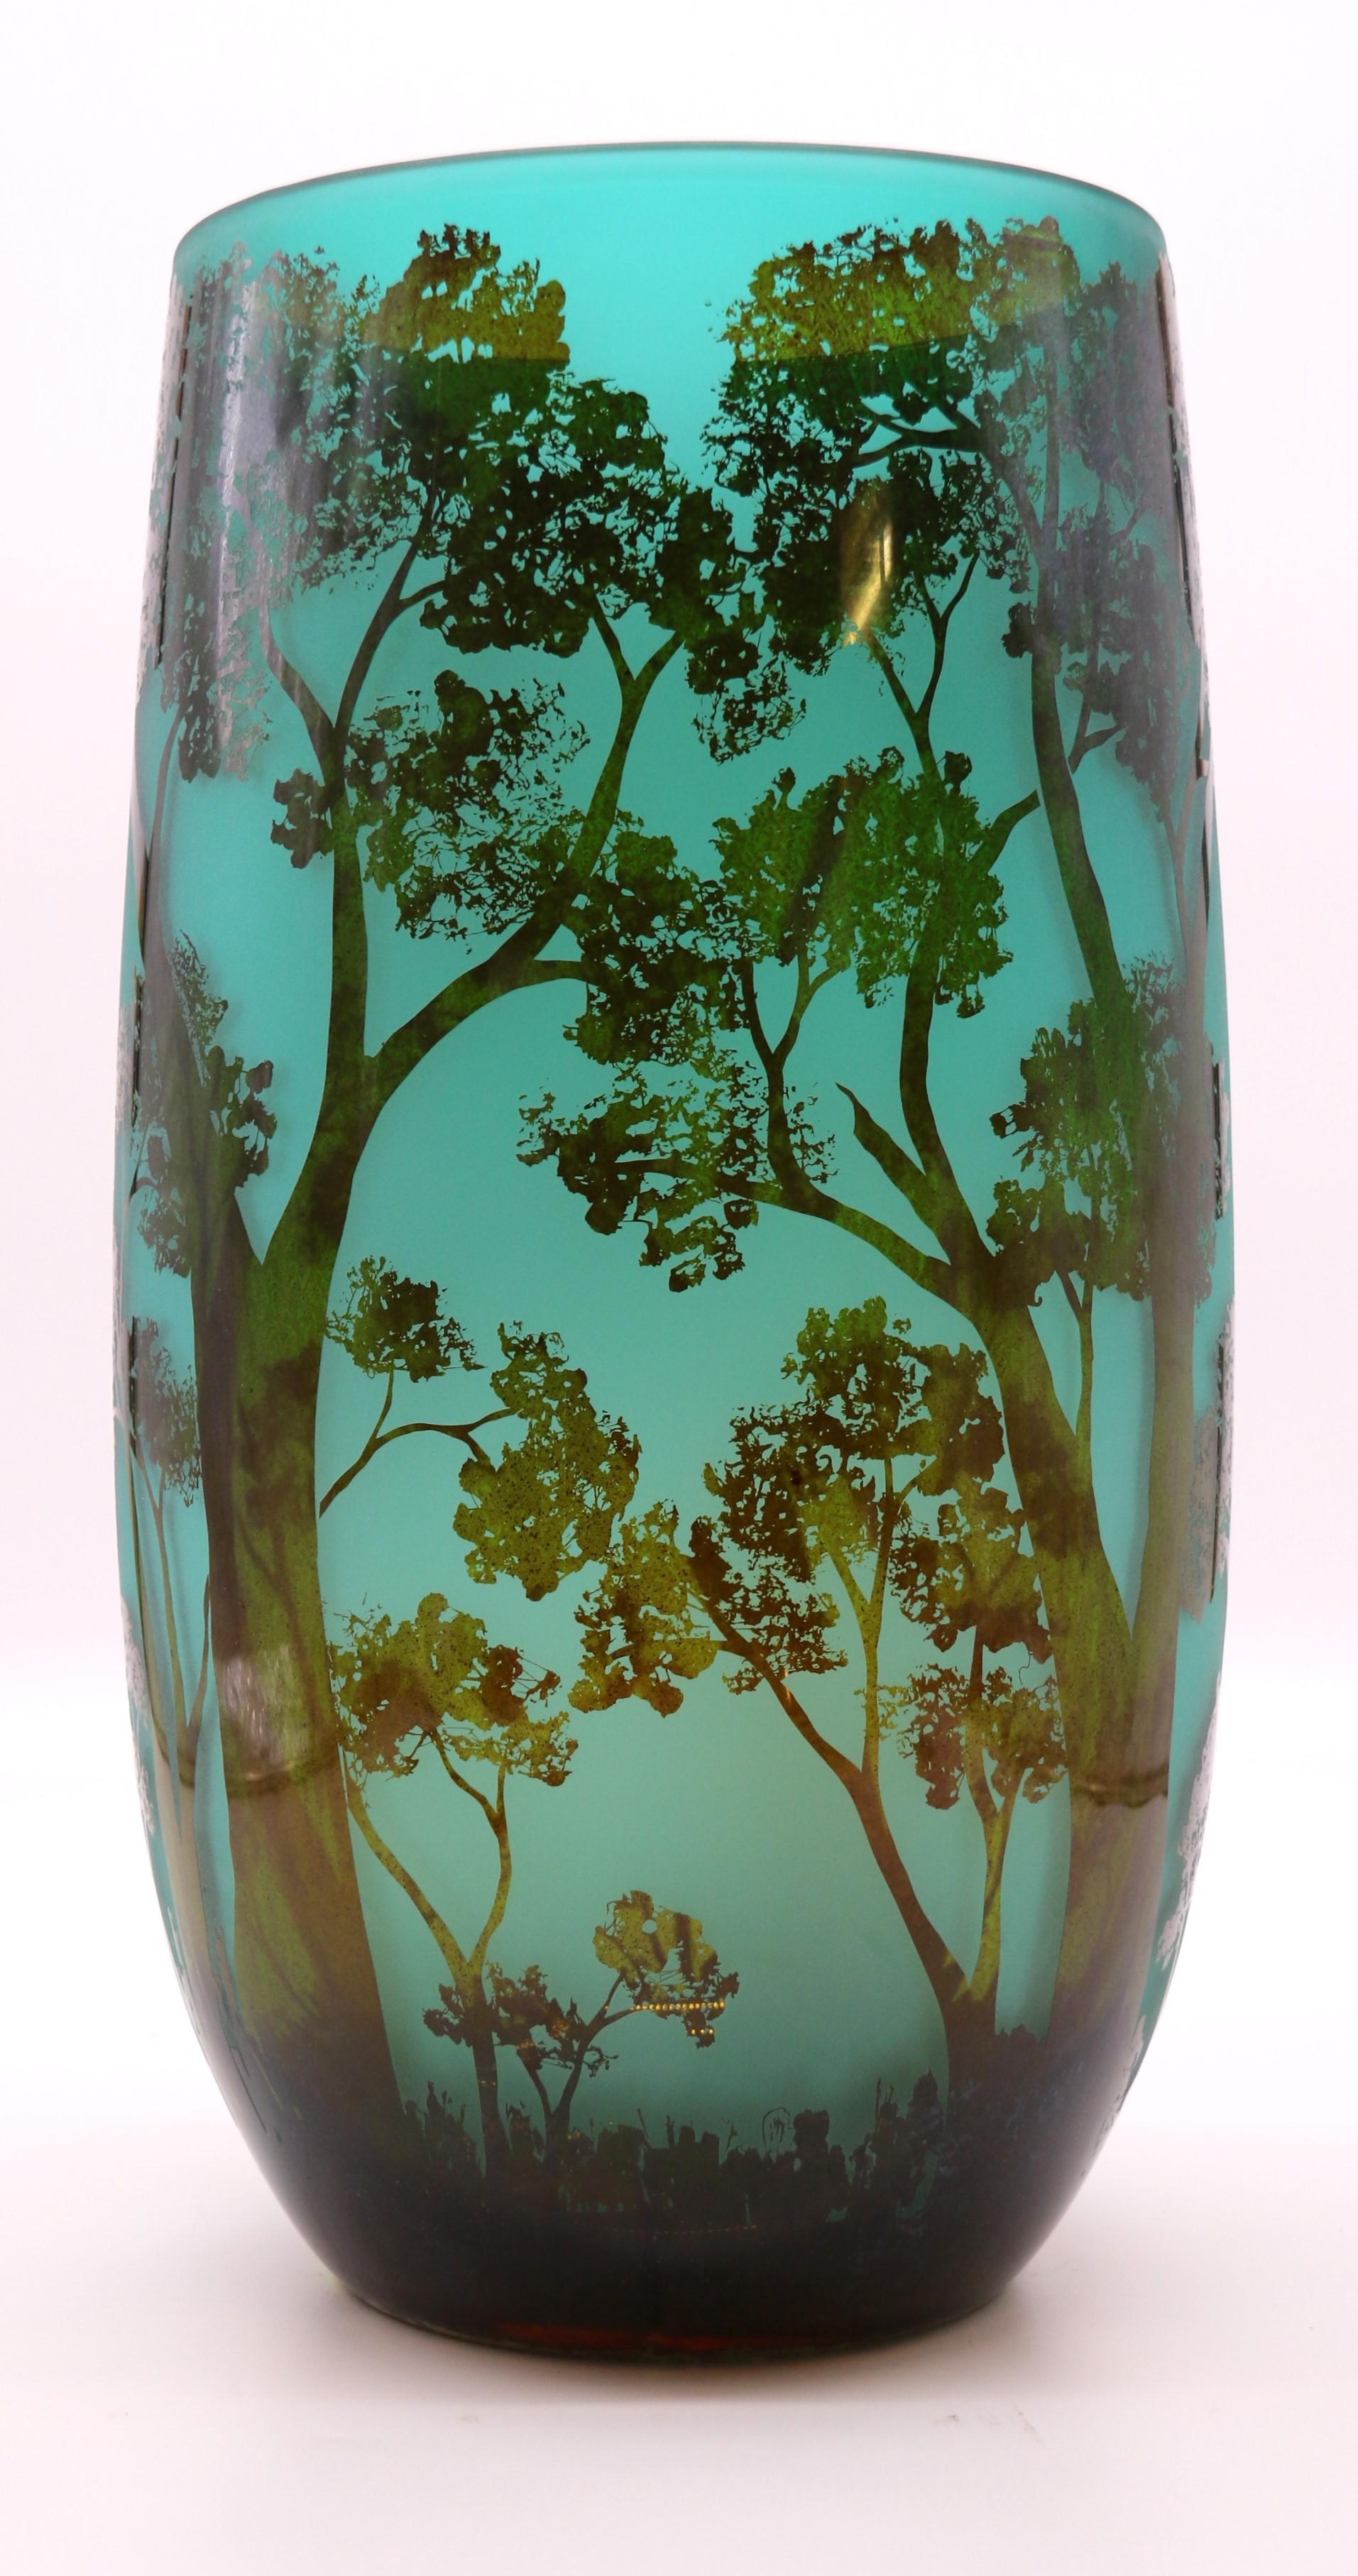 A large 20th century cameo glass vase decorated with an intricate woodland scene 1